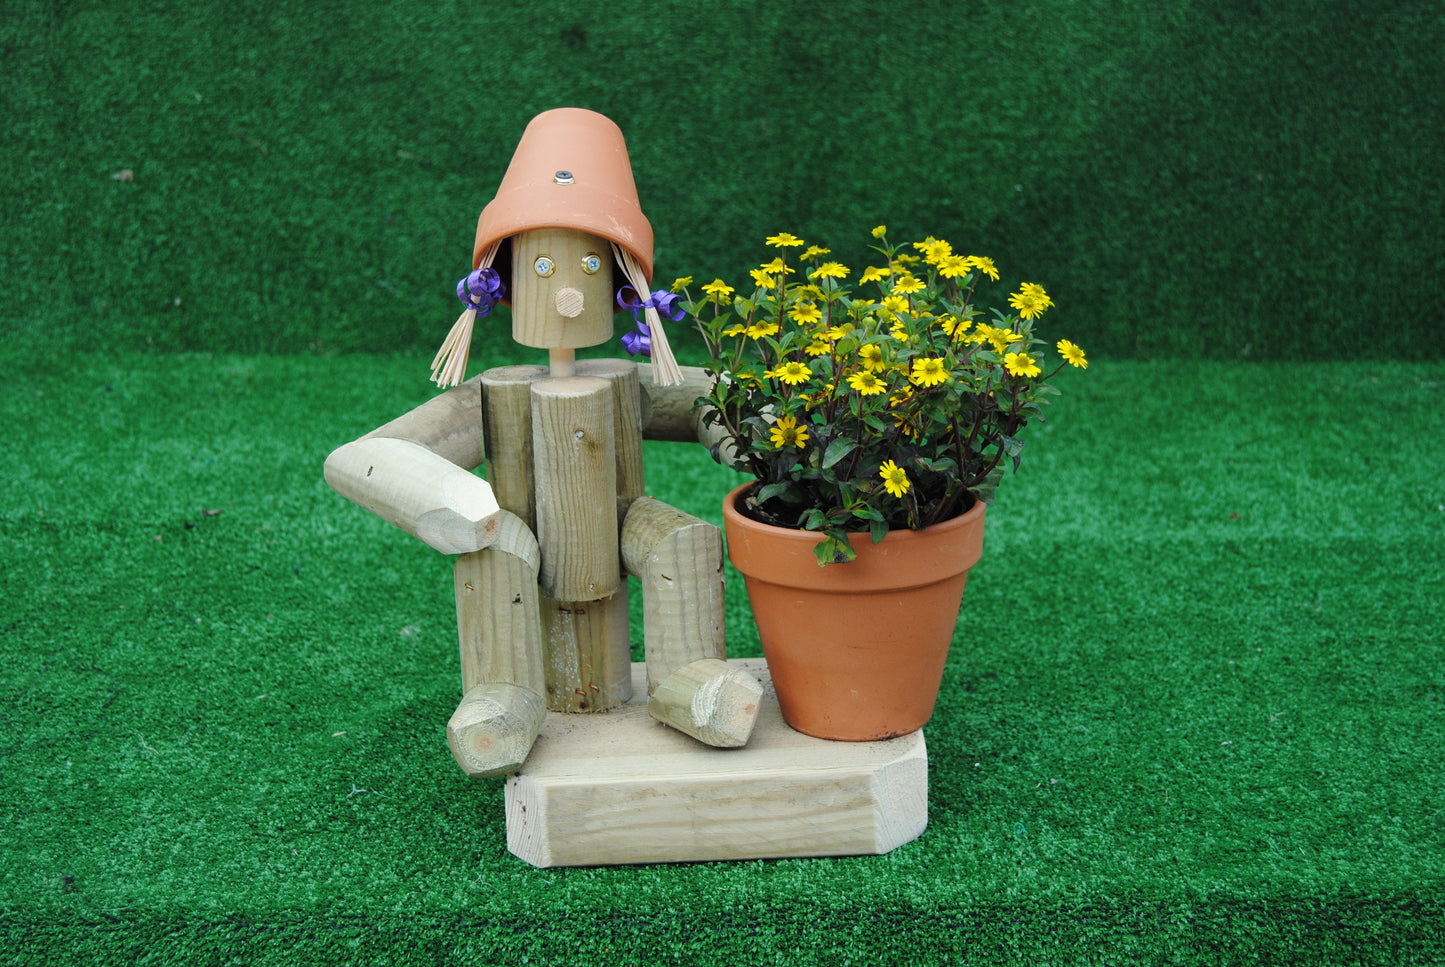 Small,sitting girl holding a pot